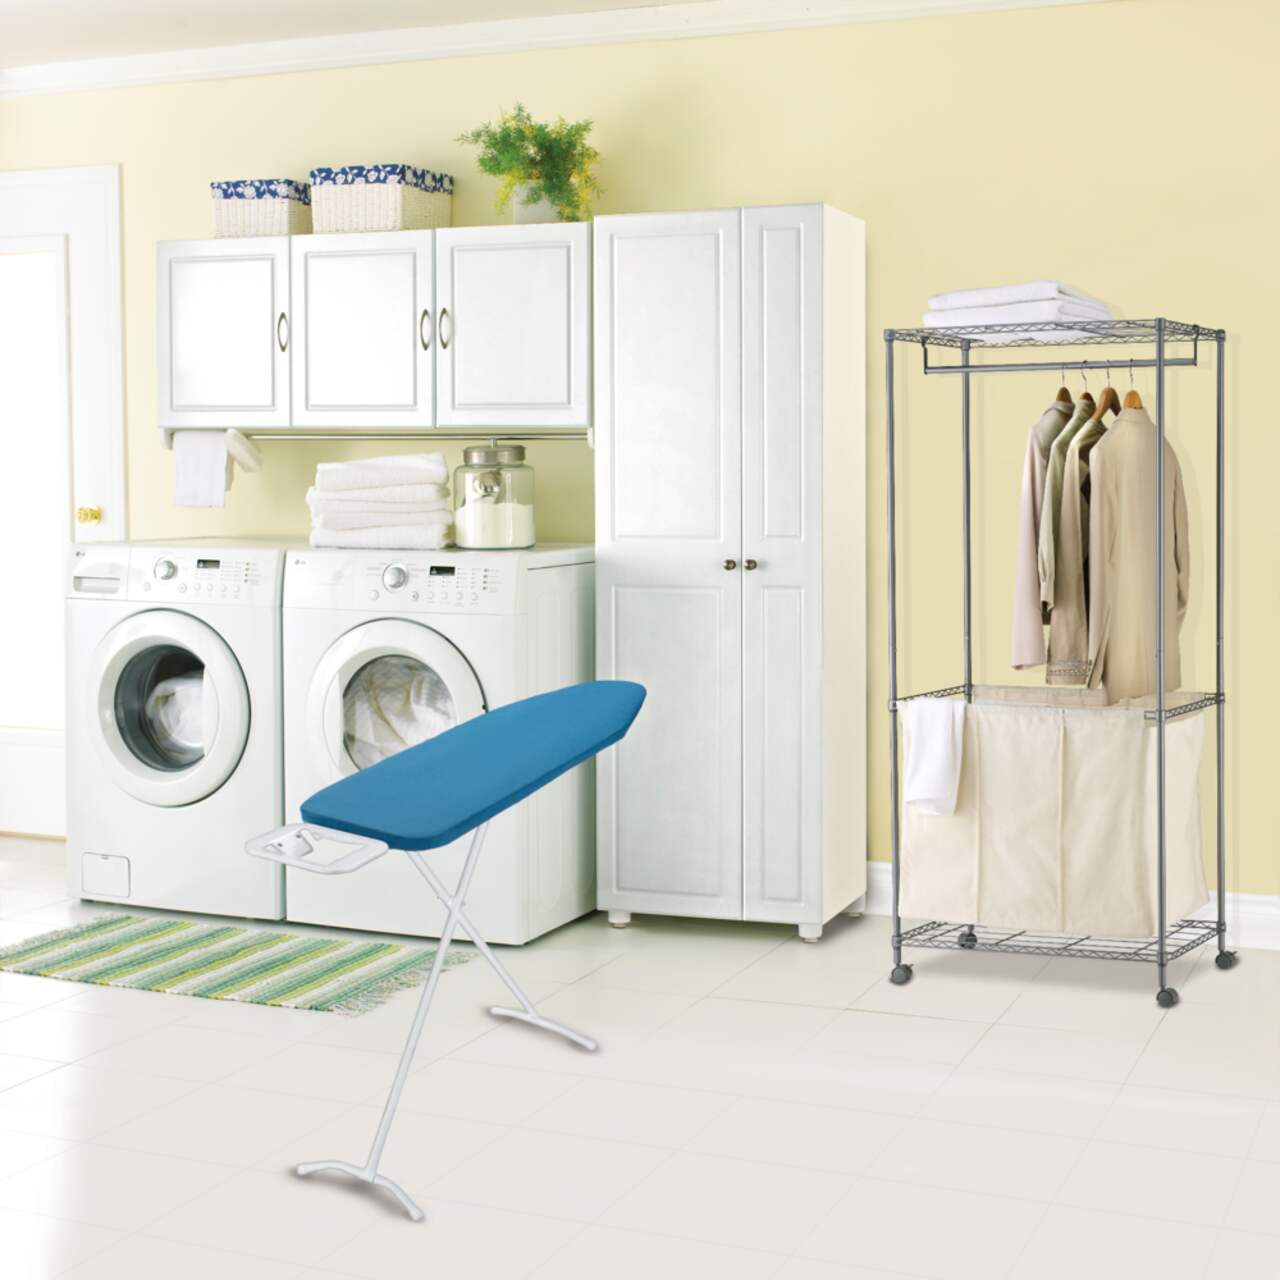 VerPetridure Clearance Laundry Decor for Laundry Room Open 24